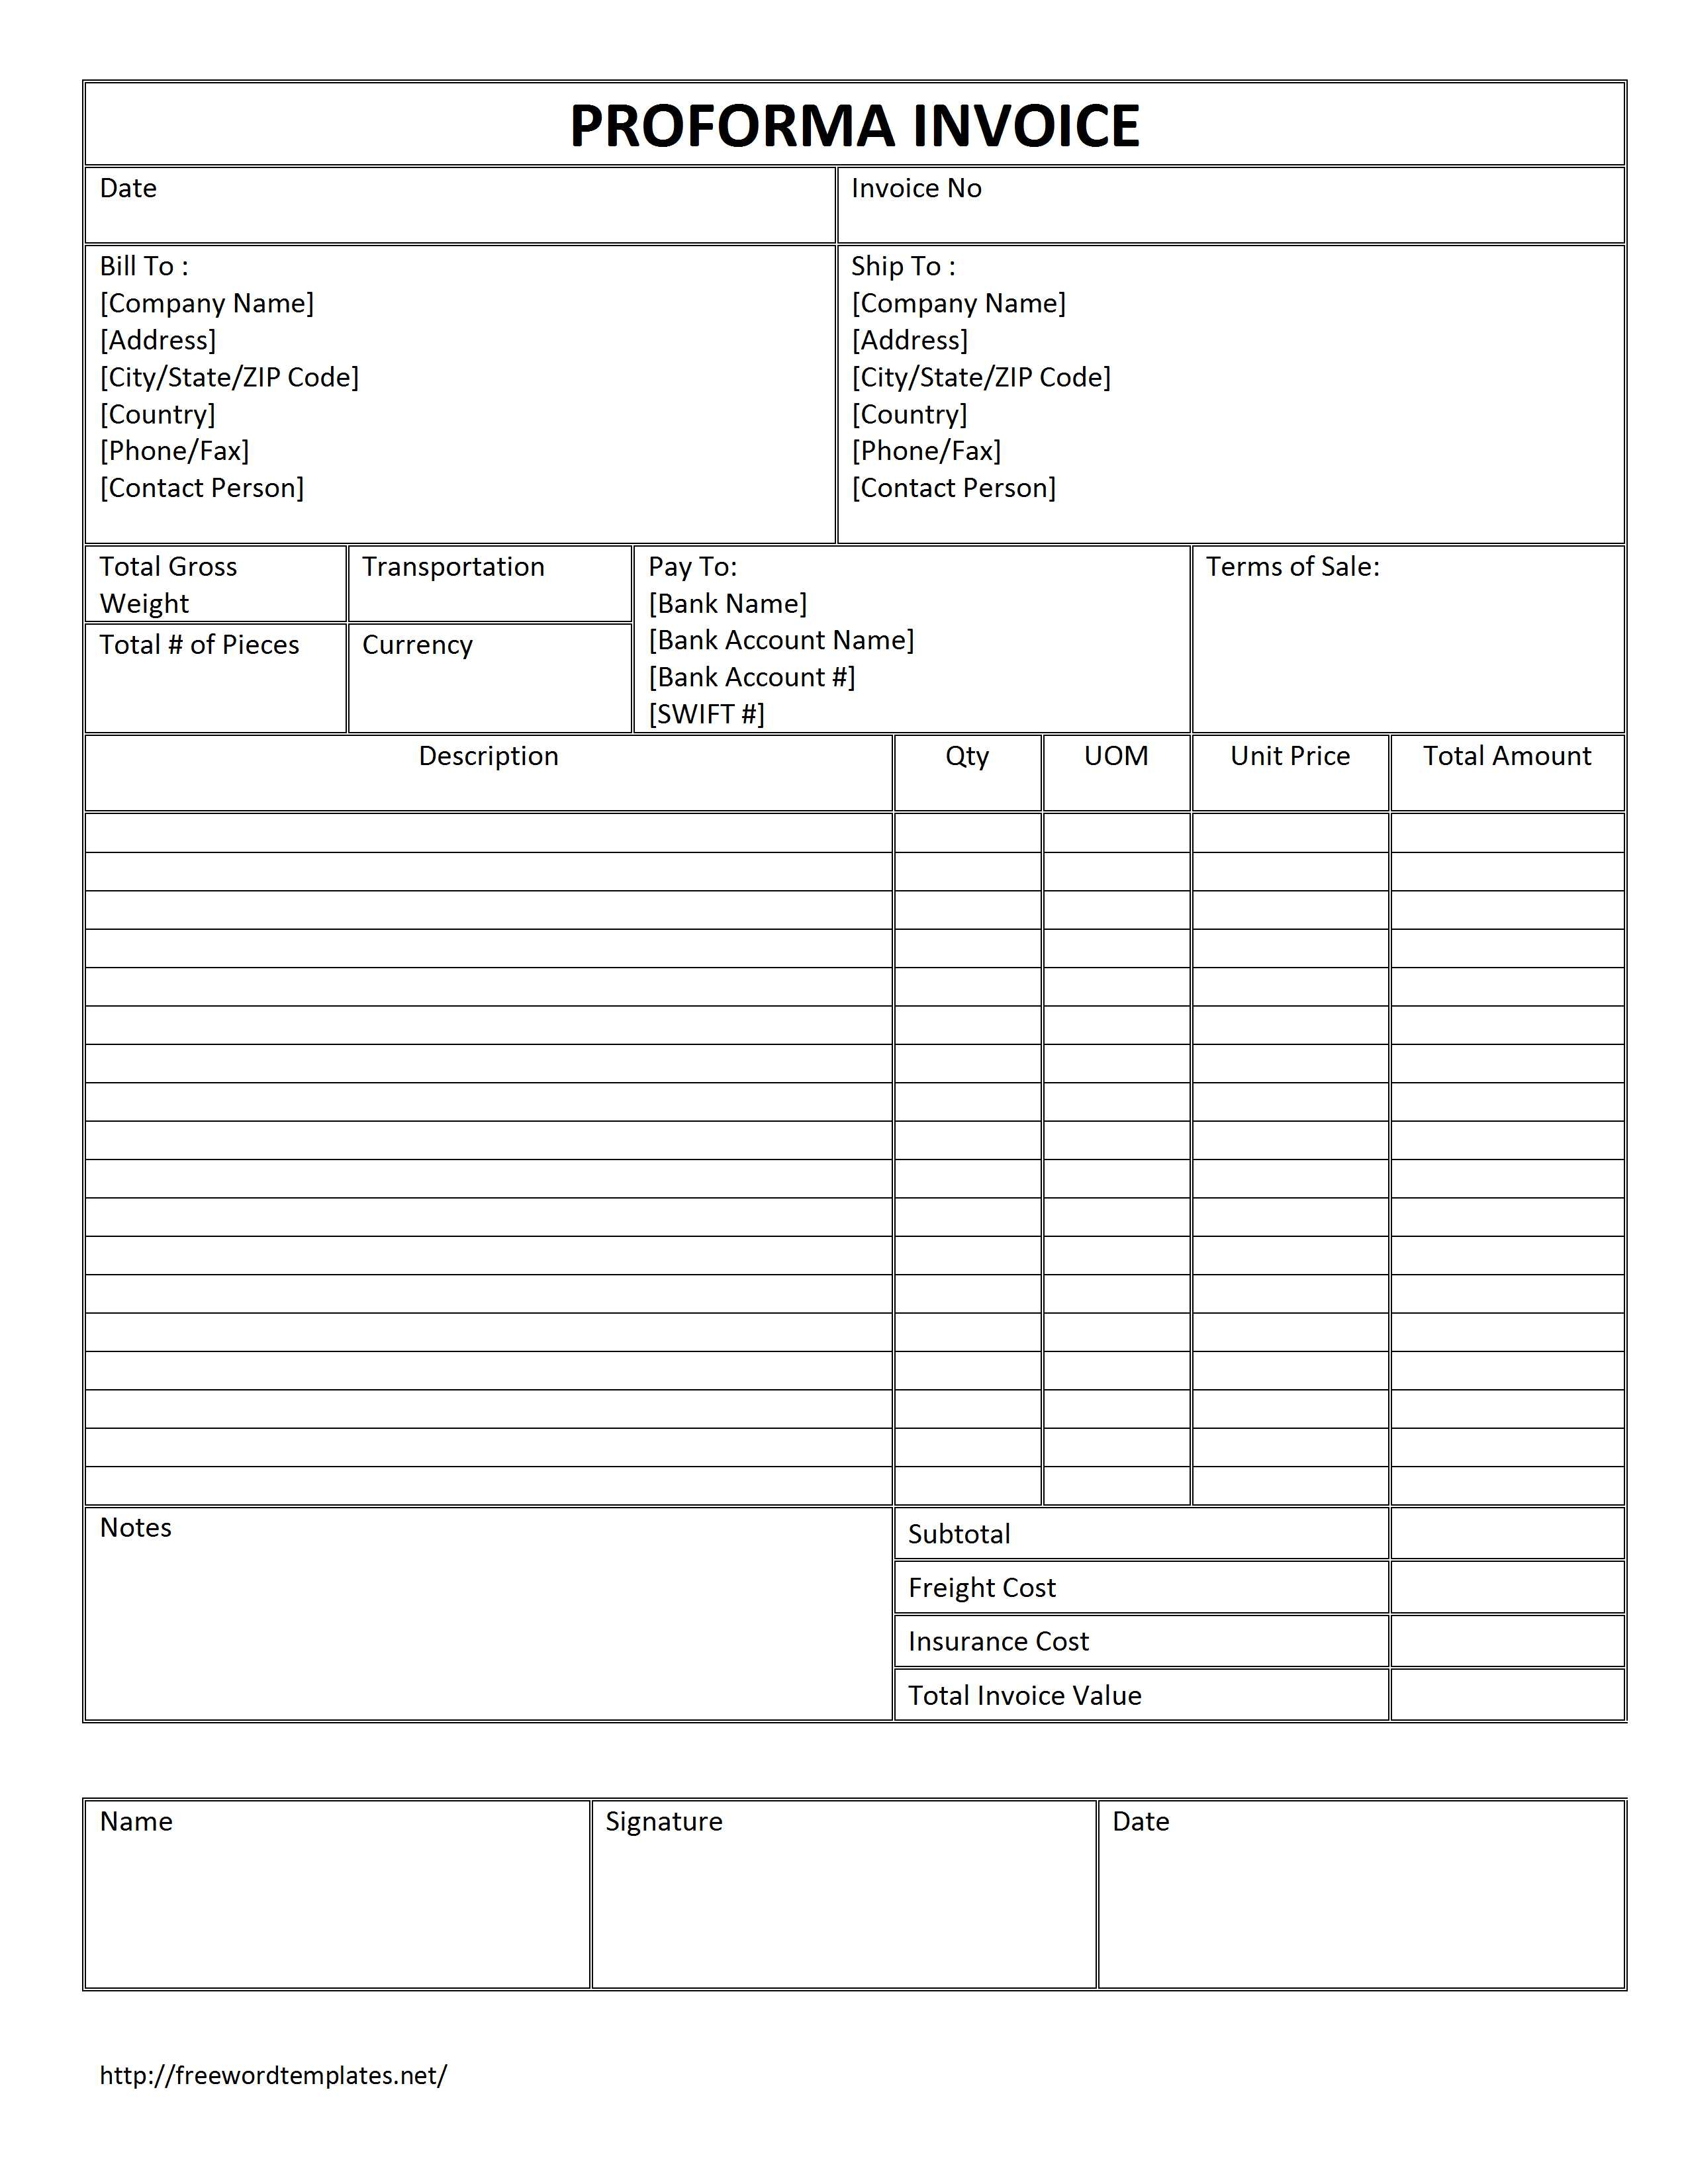 commercial invoice freewordtemplates international proforma invoice template